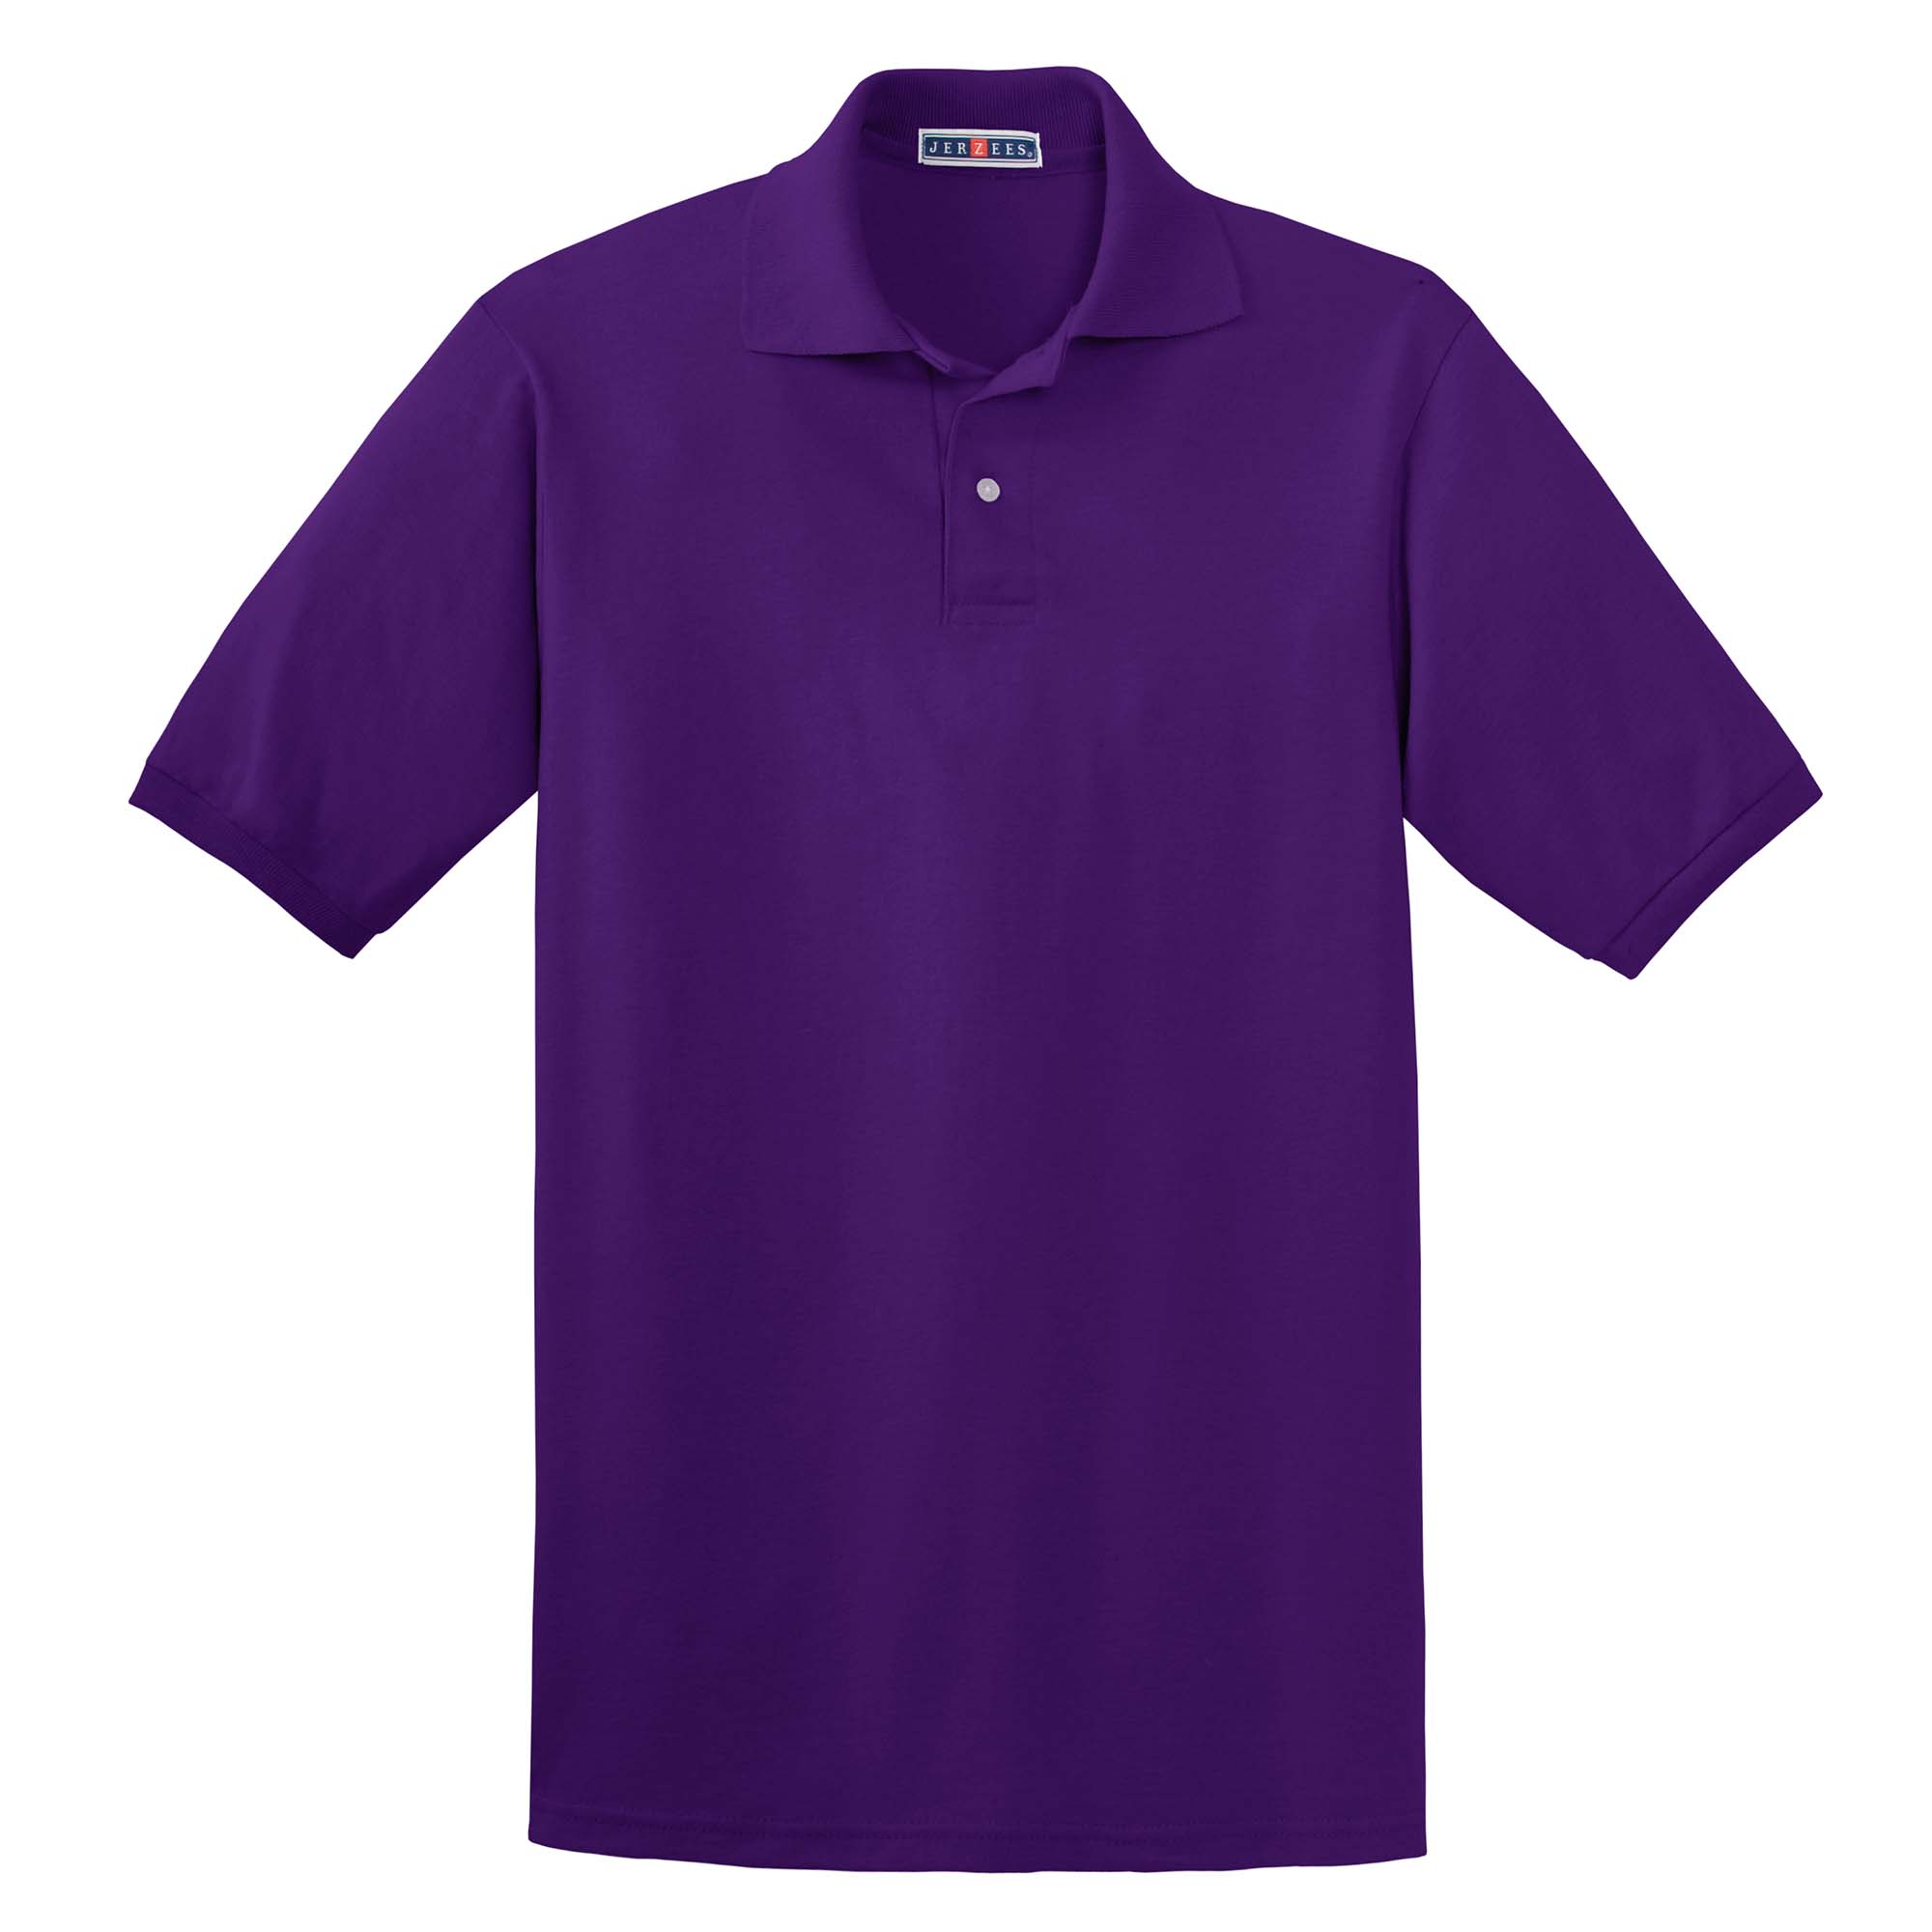 Large Jerzees 437M Adult 50-50 Cotton and Polyester Sport Shirt44; Deep Purple